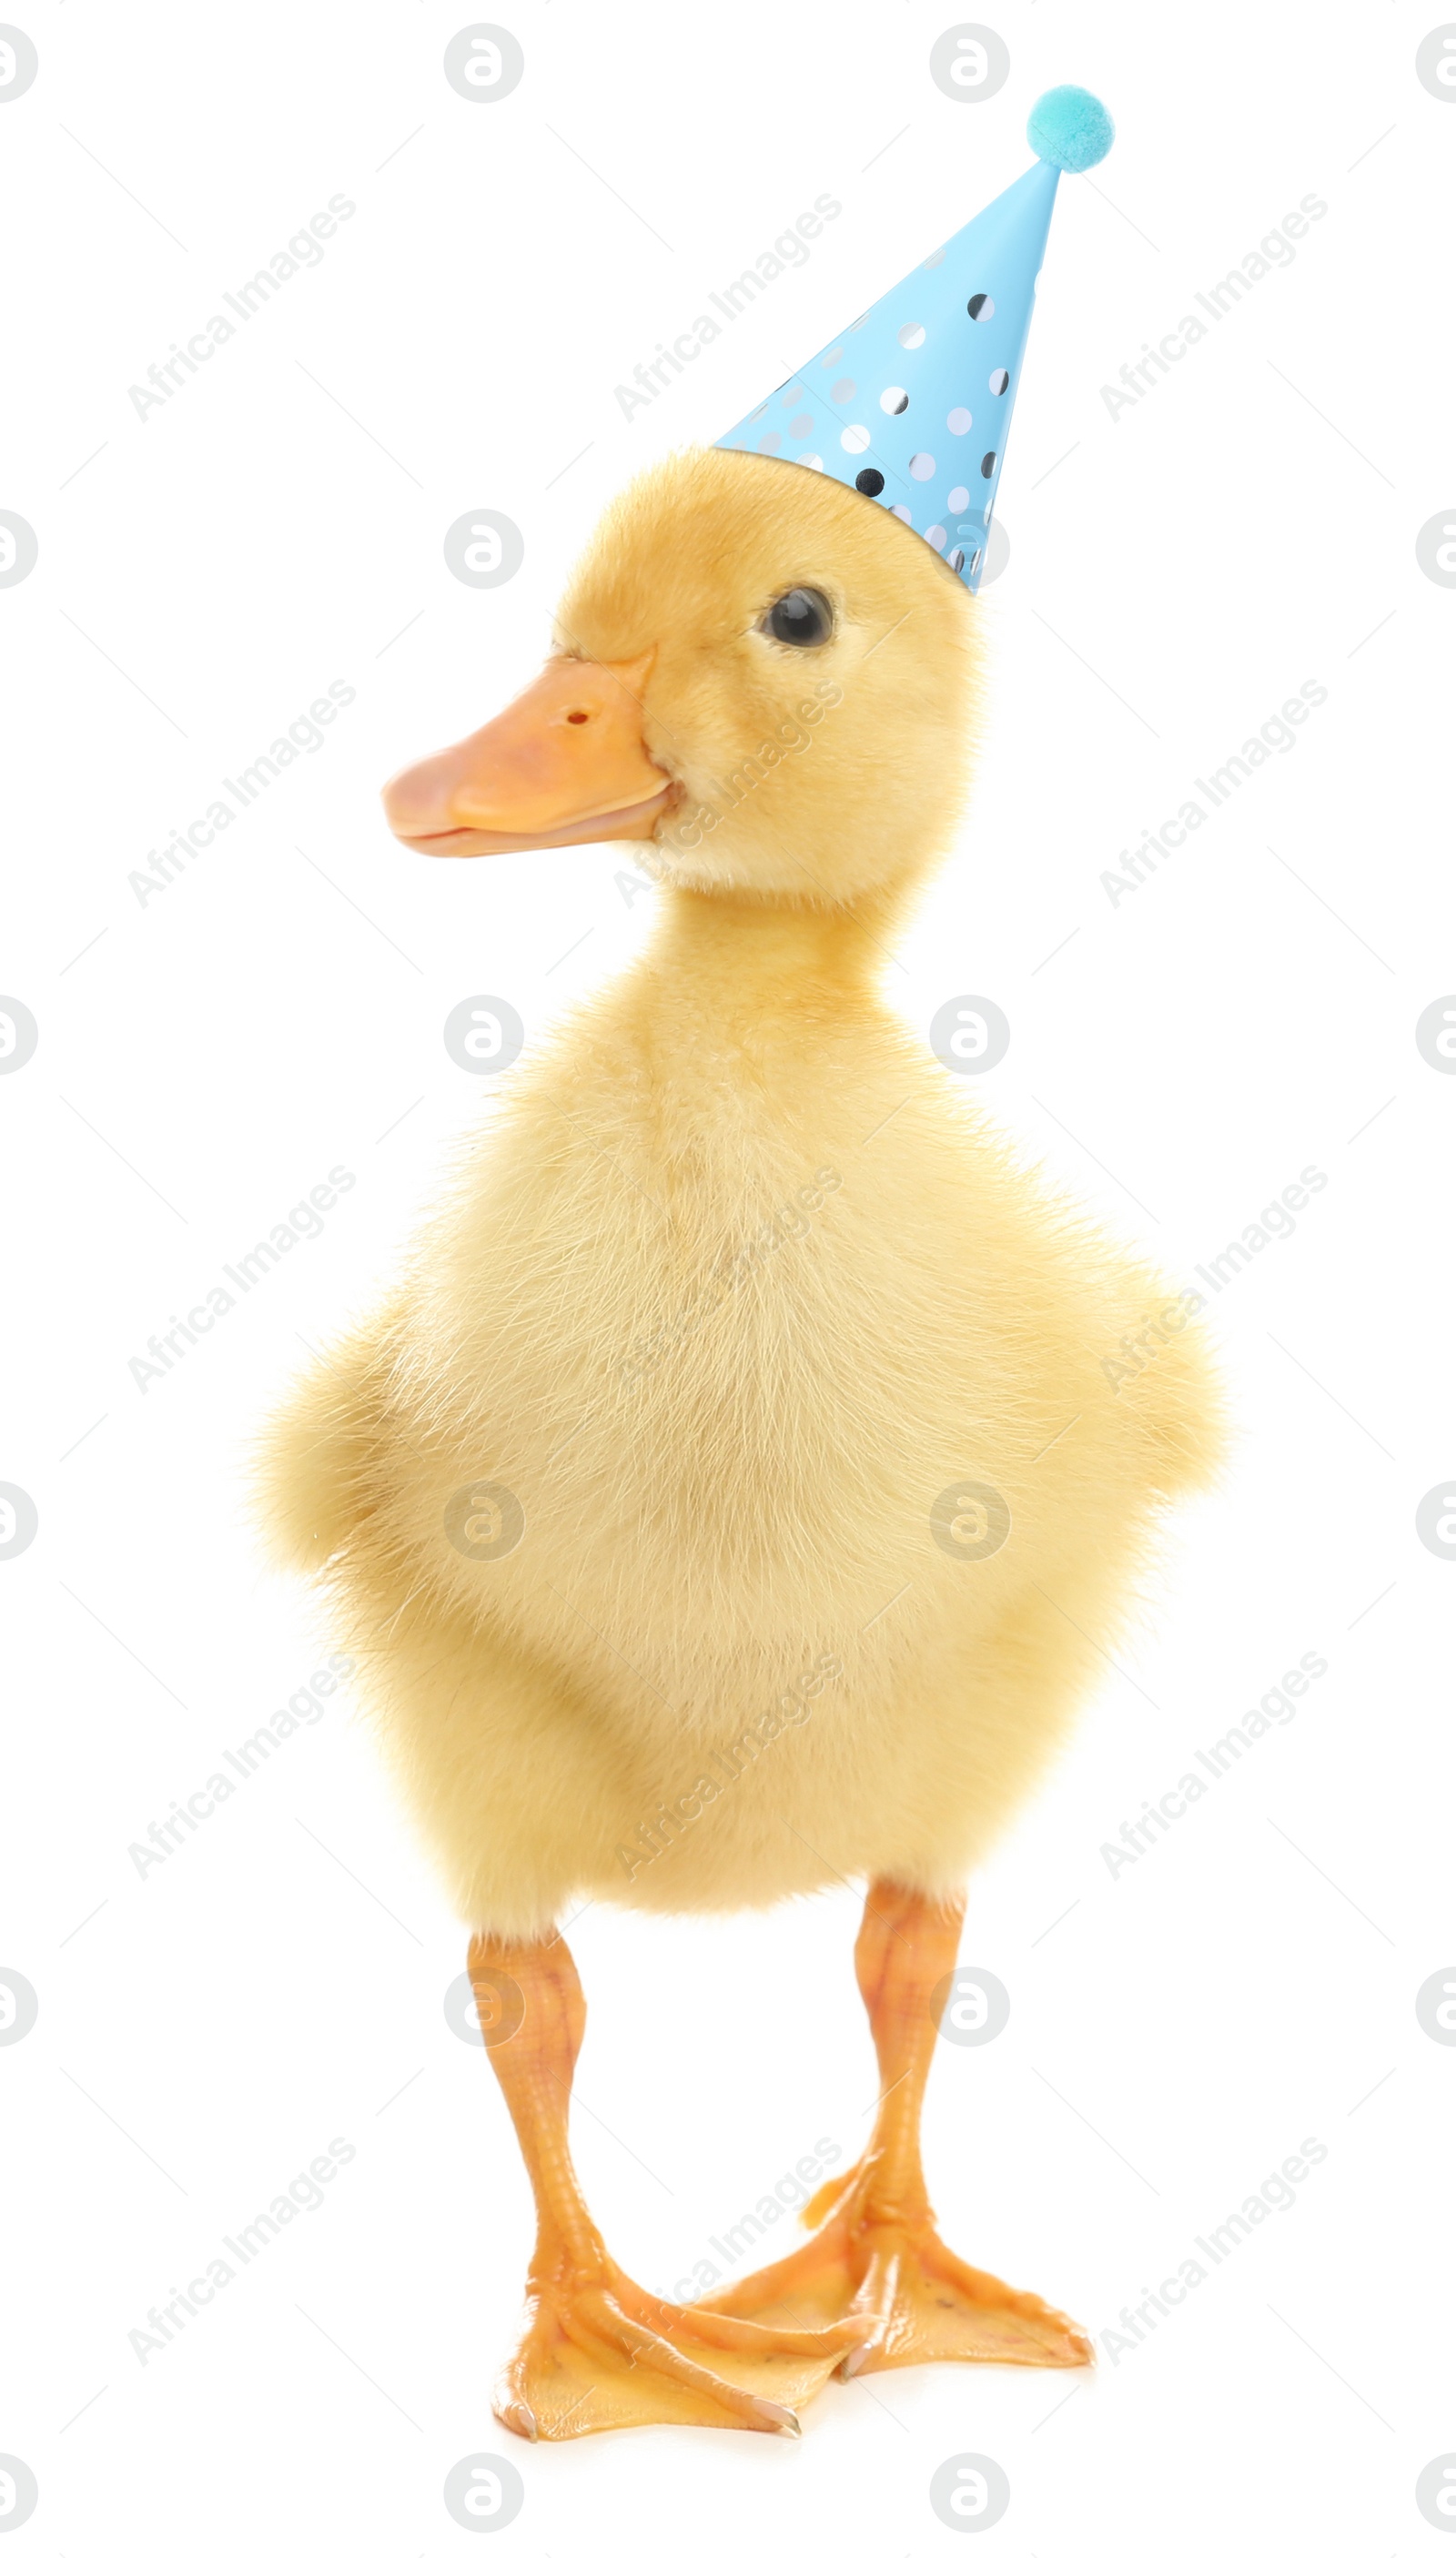 Image of Cute little duckling with party hat on white background